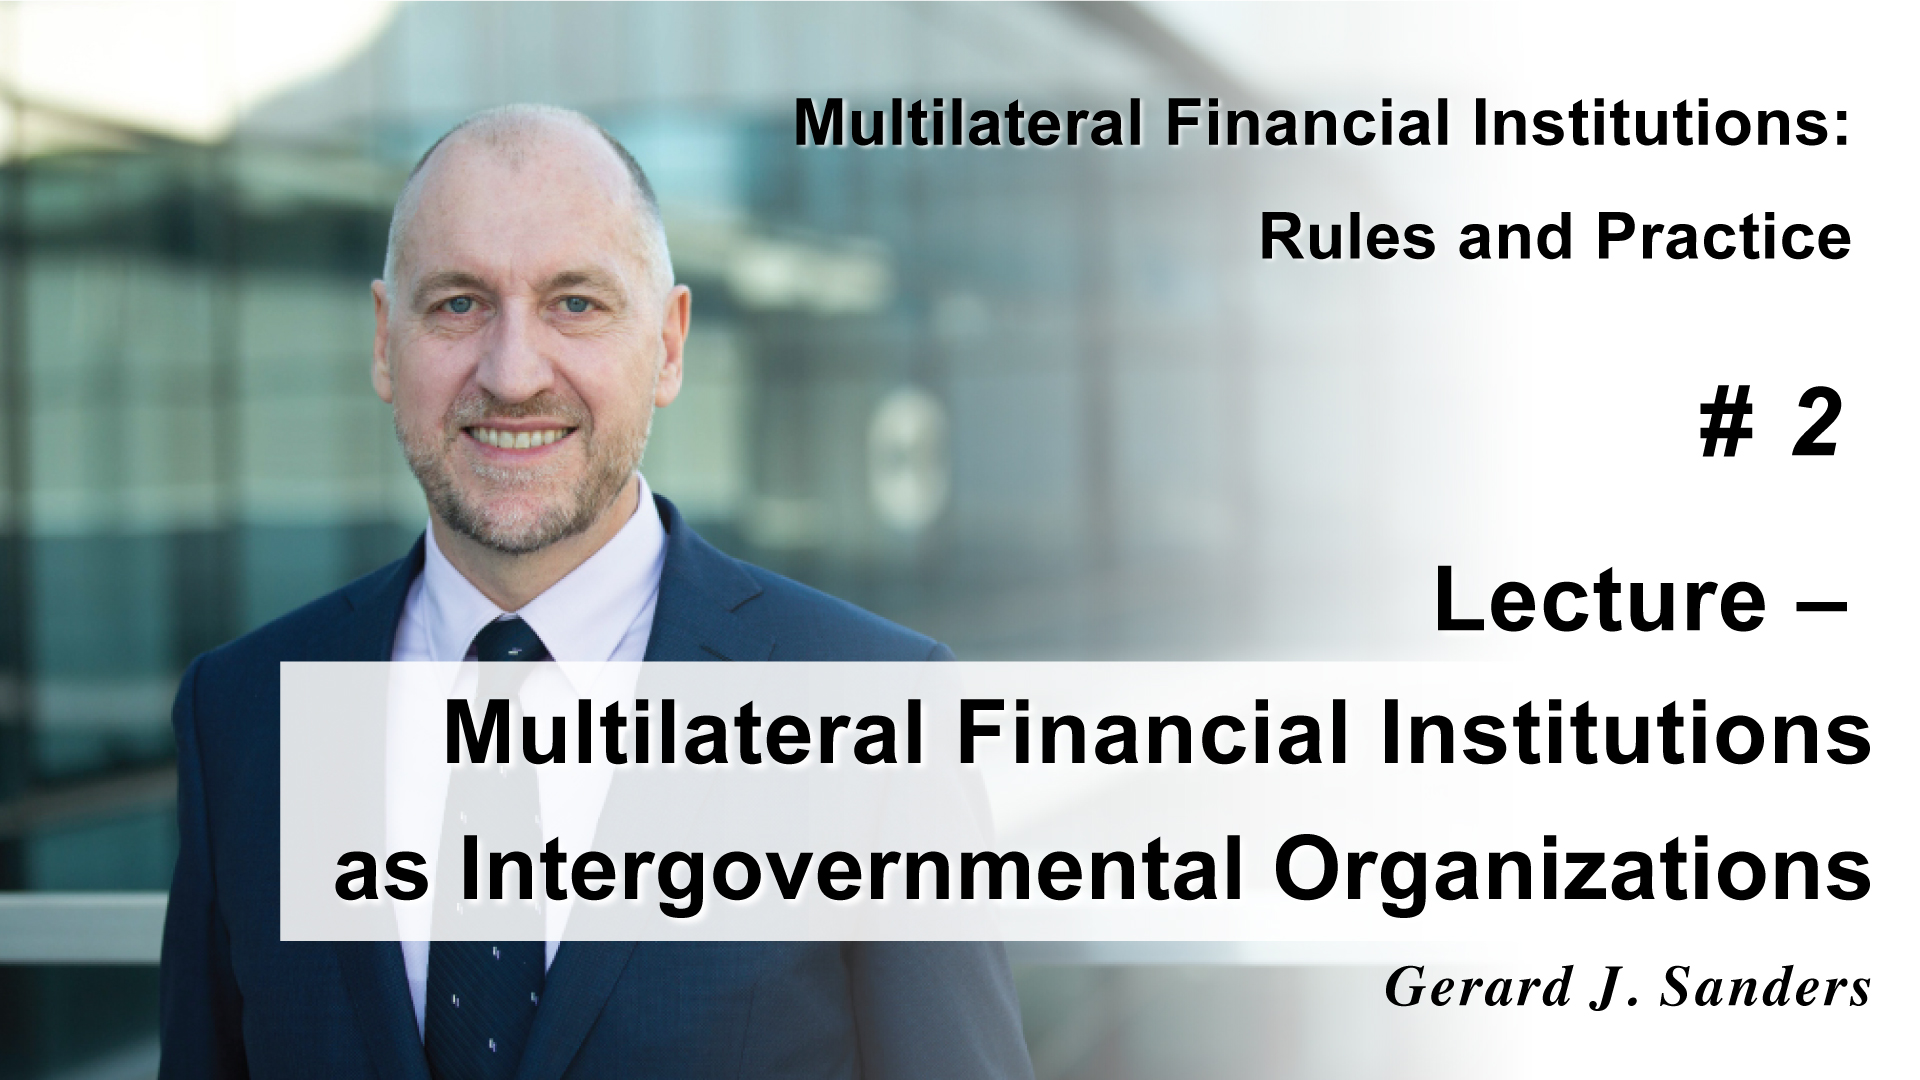 Lecture - Multilateral Financial Institutions as Intergovernmental Organizations